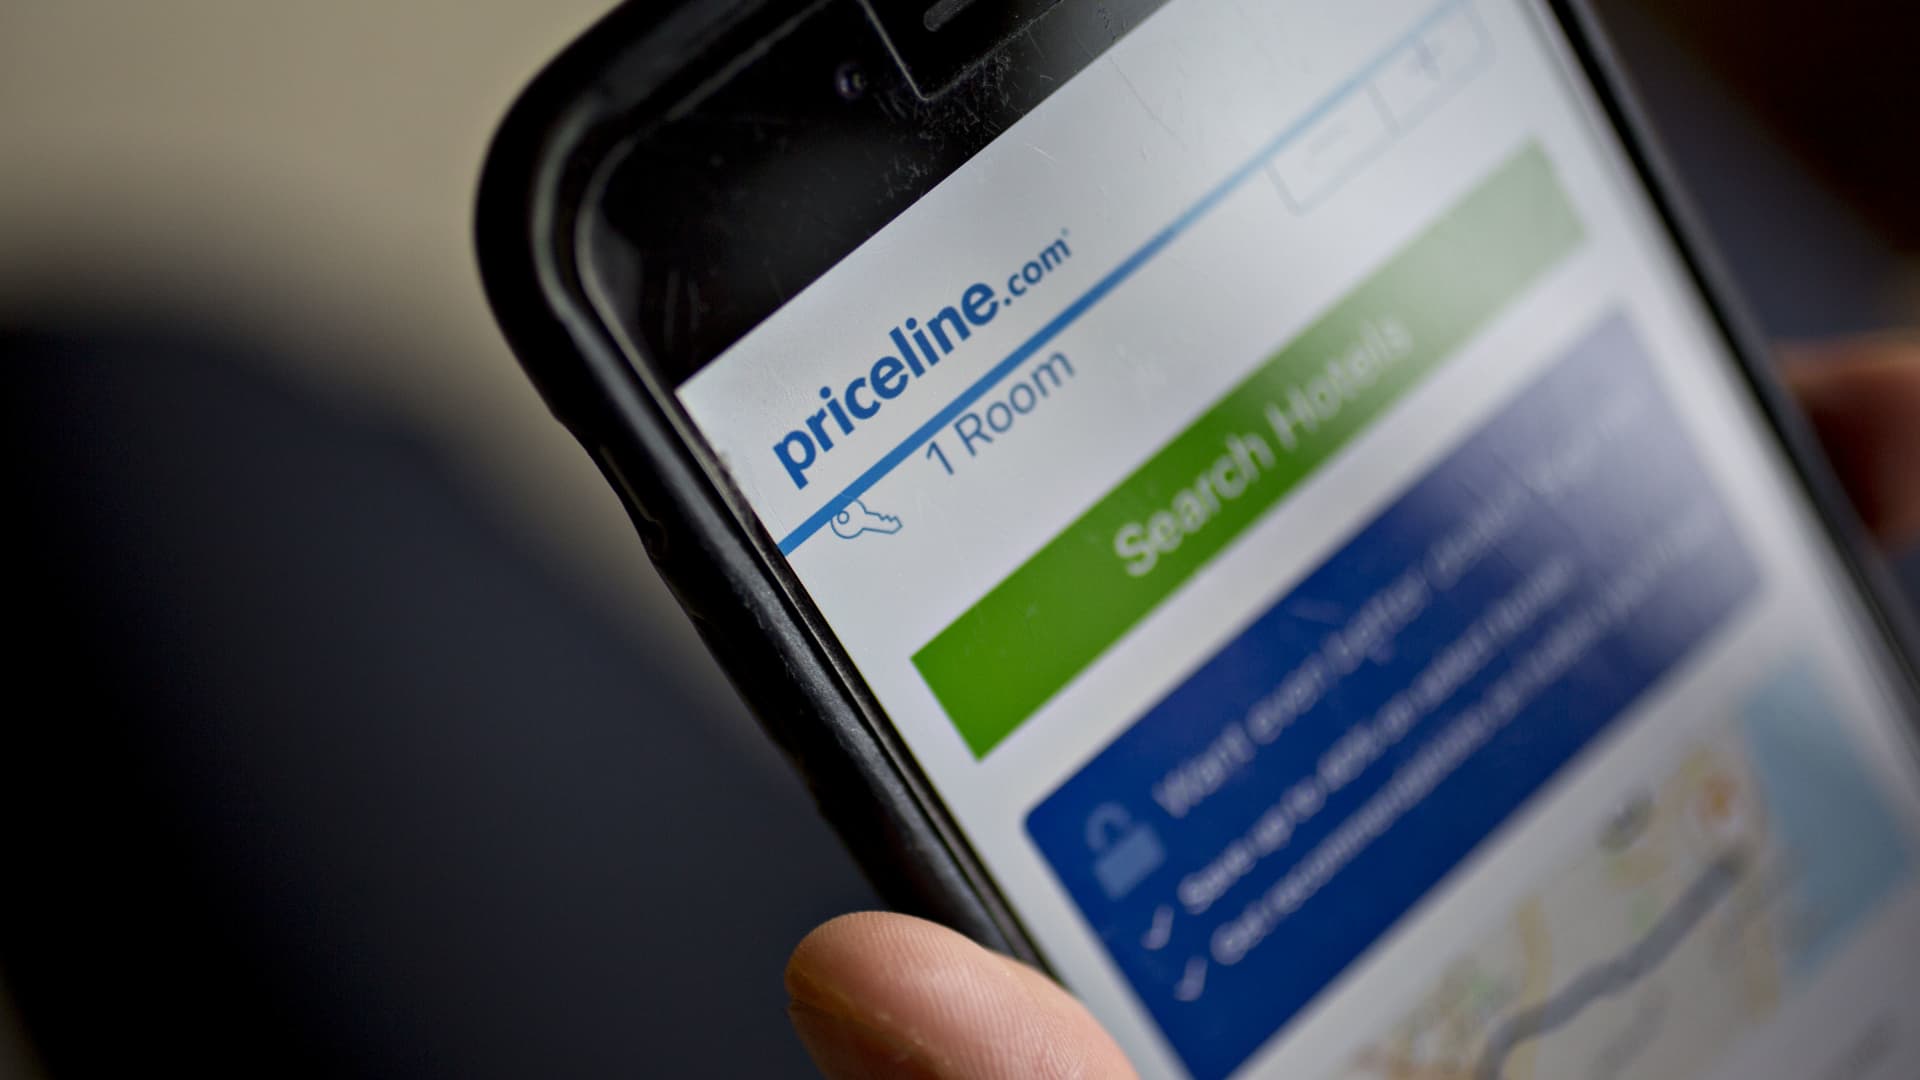 Priceline joins A.I. chatbot race, signing on with Google to assistance ease travel booking